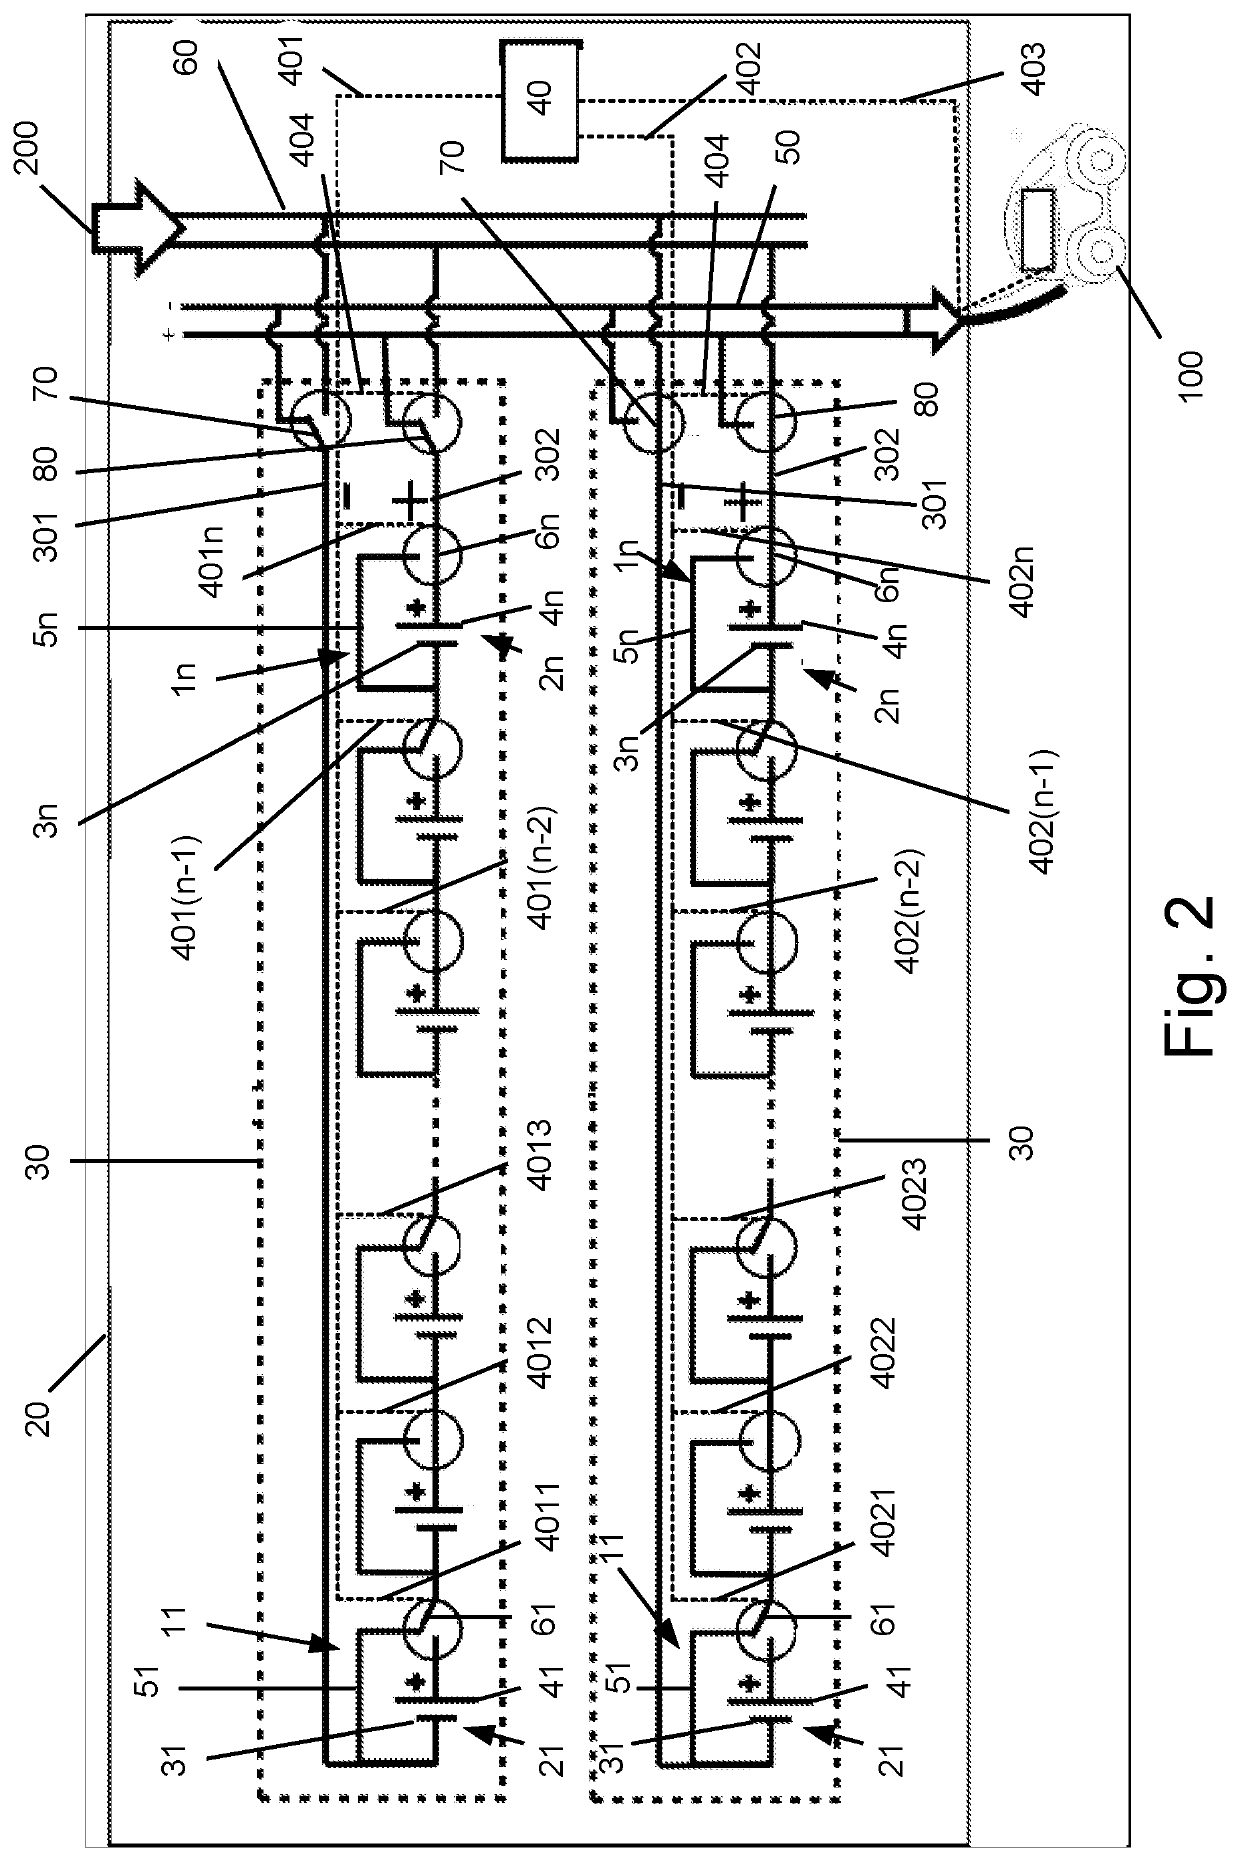 Charging station for charging electrical vehicles